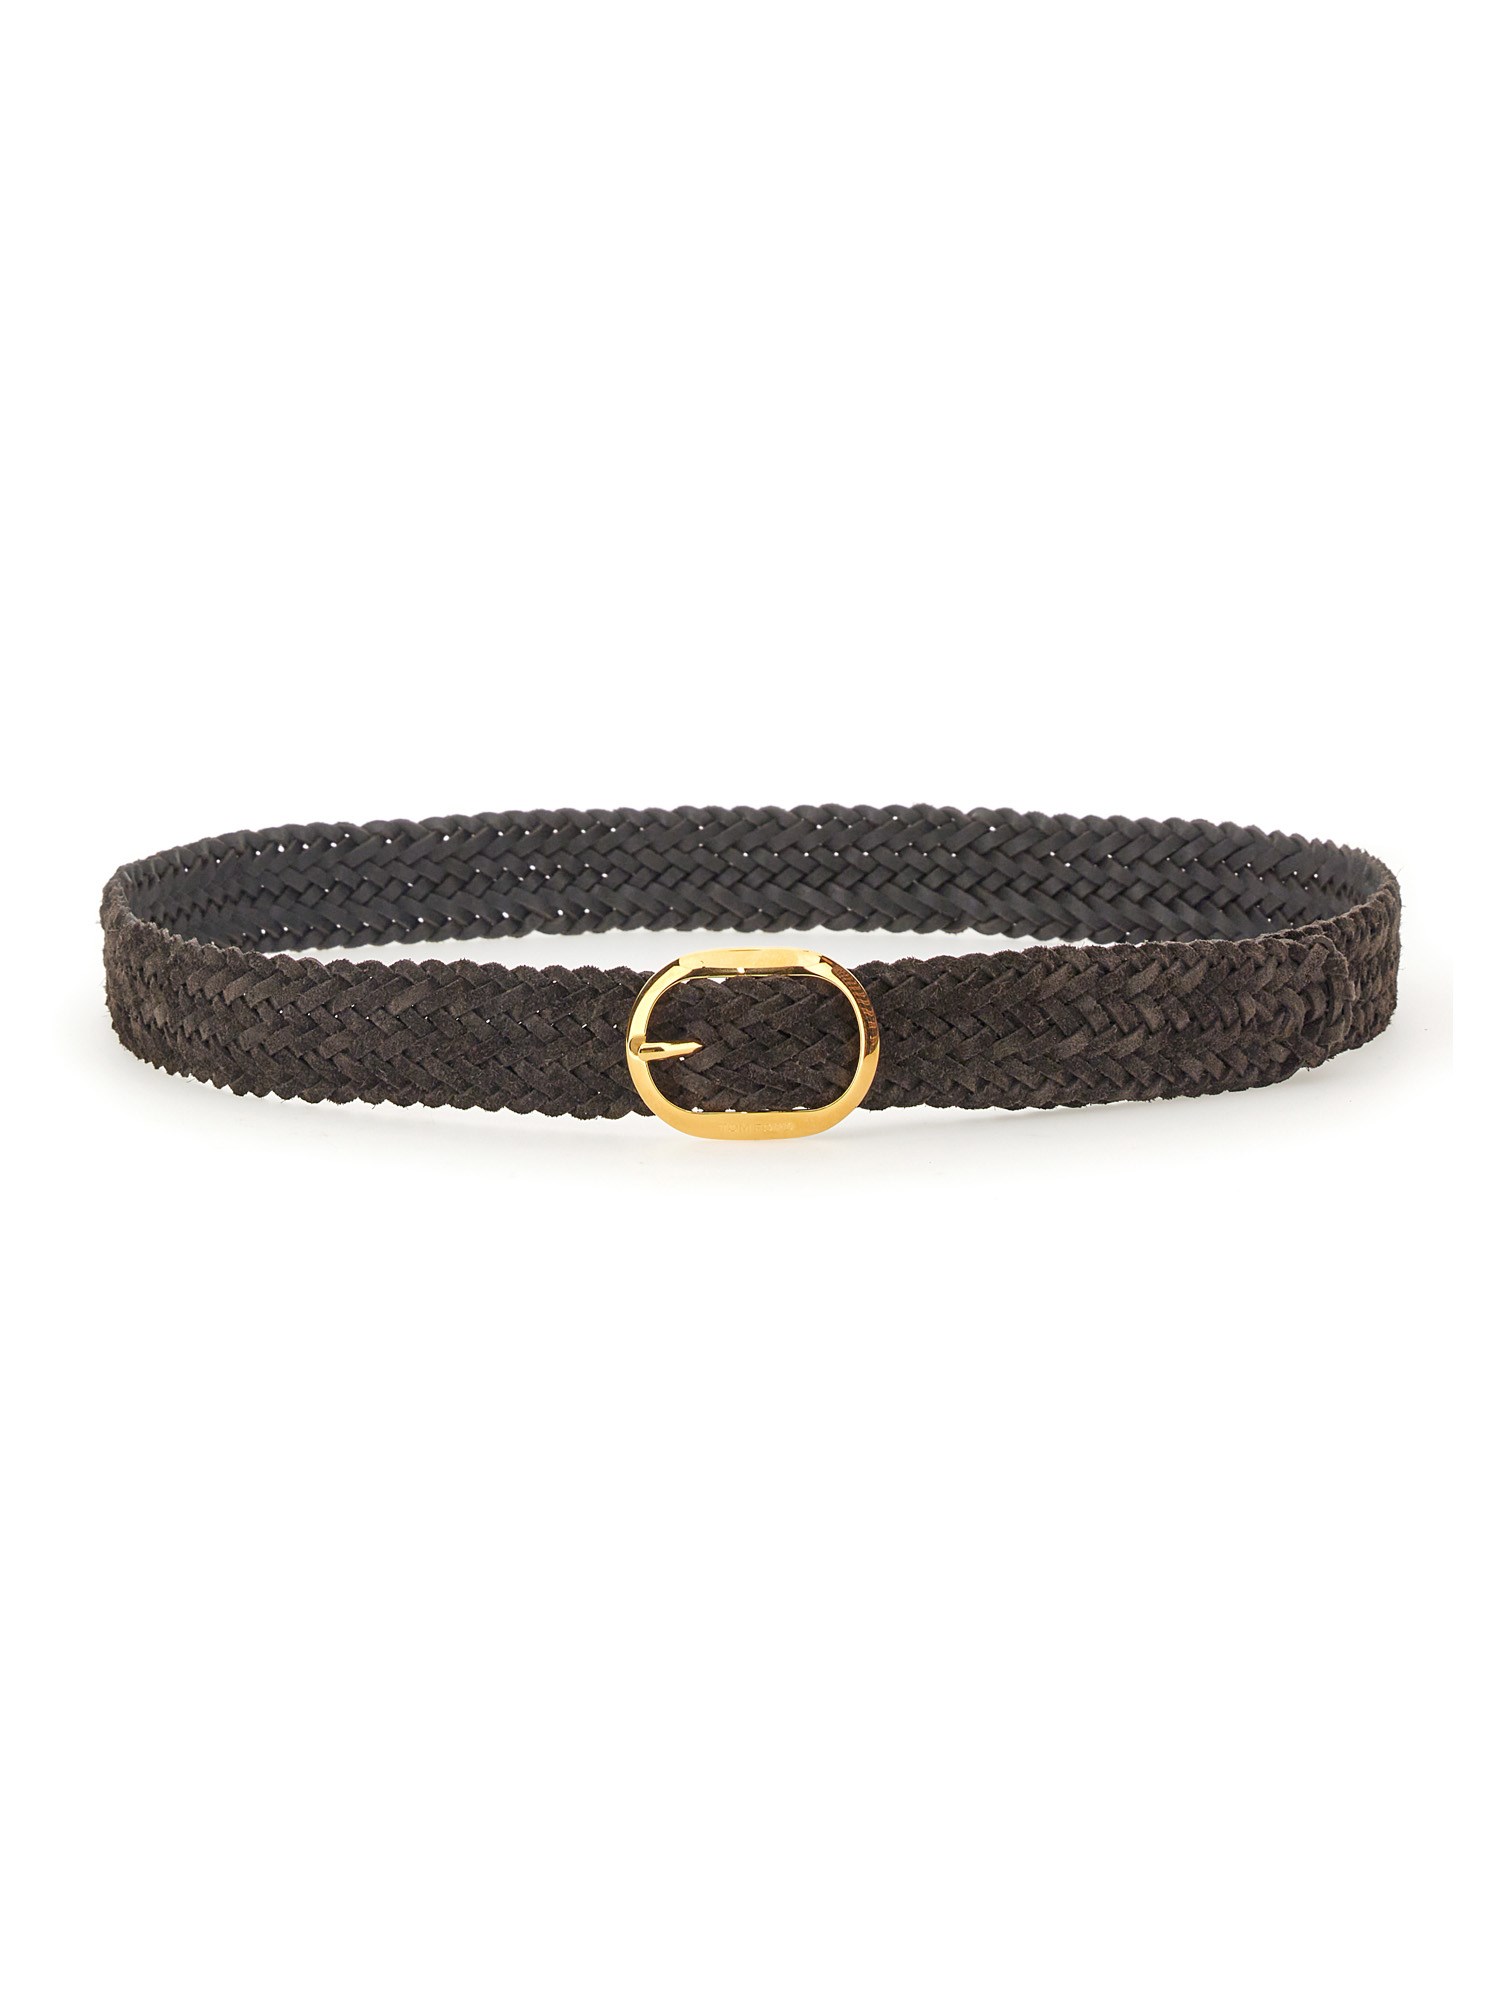 tom ford woven leather belt